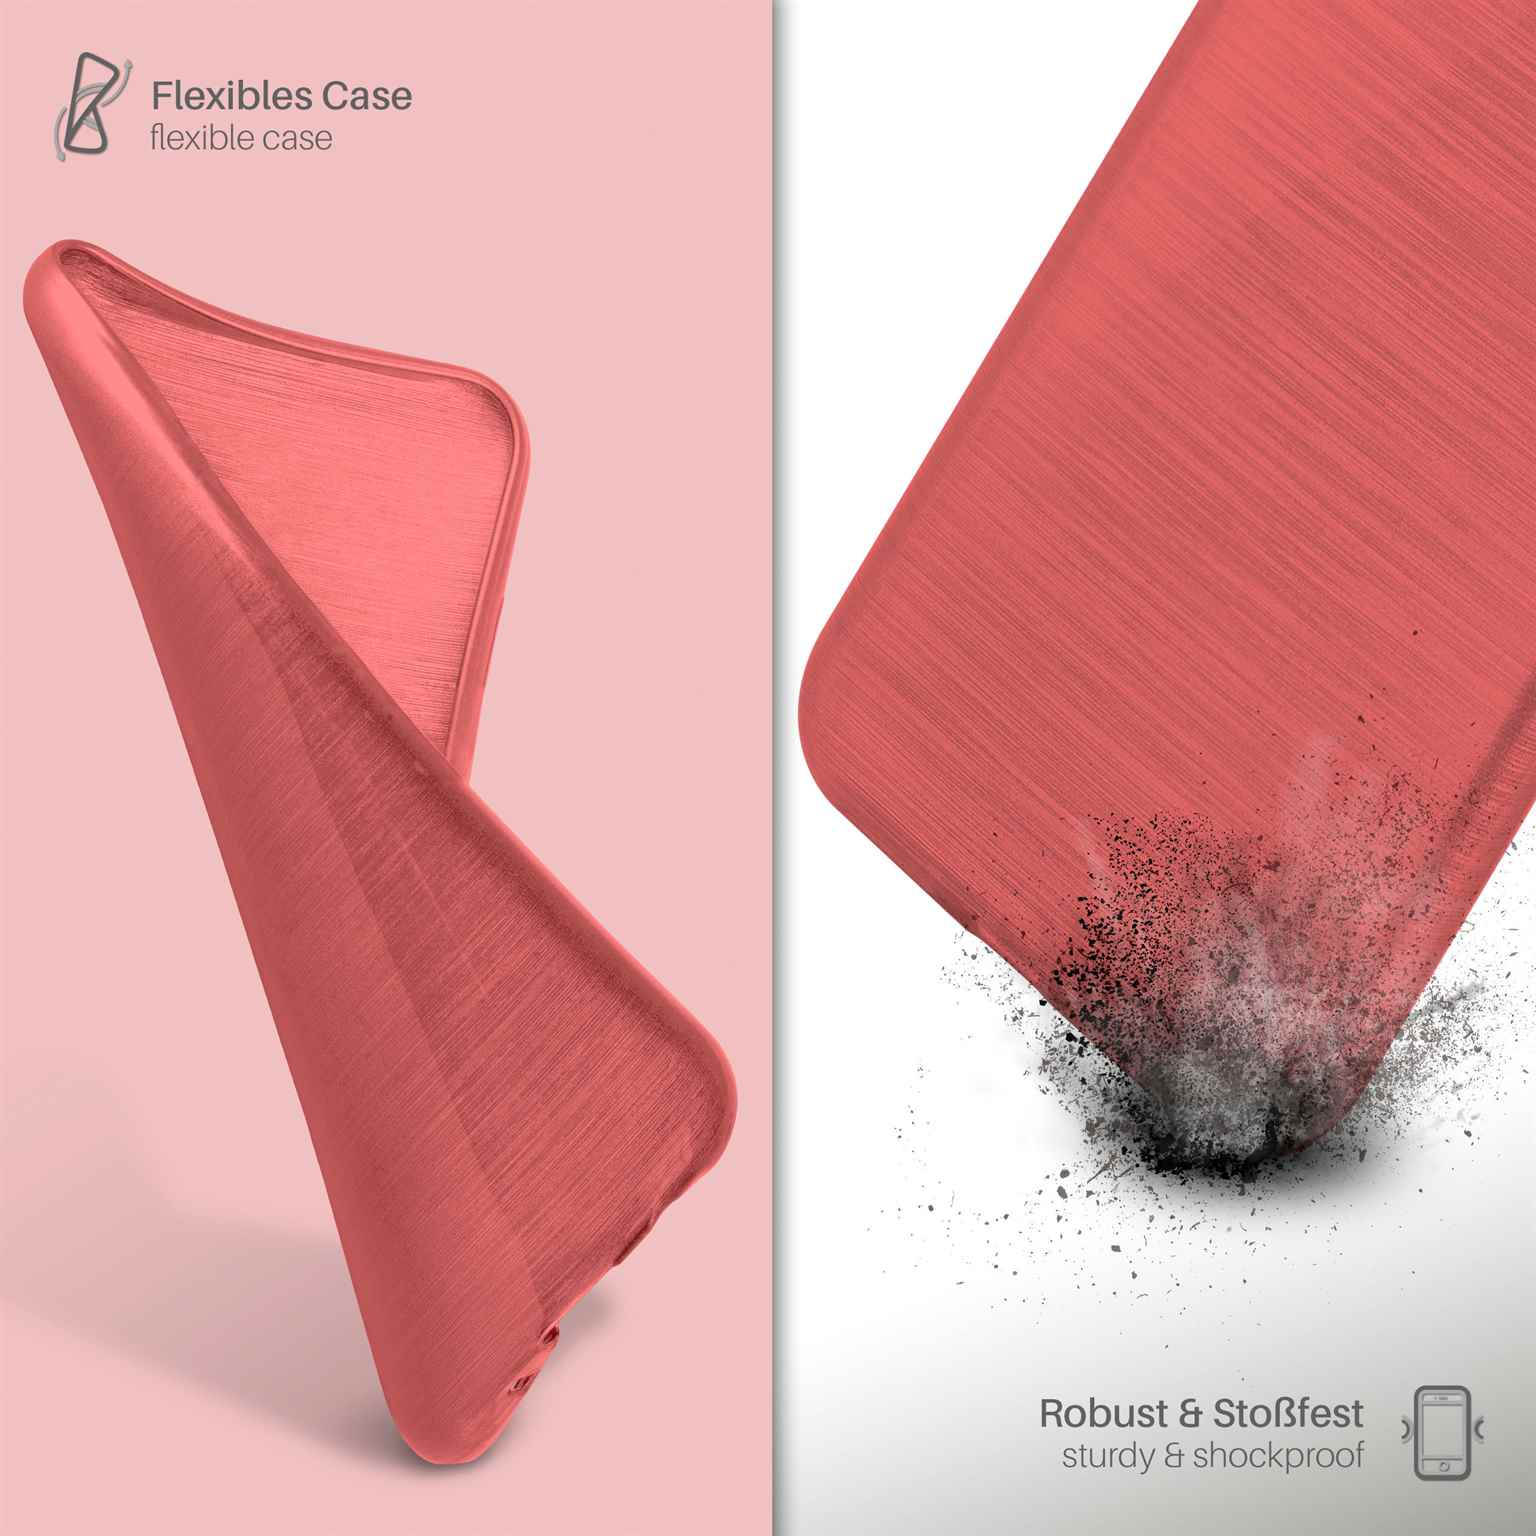 Coral-Red Backcover, Case, MOEX Samsung, S8 Brushed Galaxy Plus,